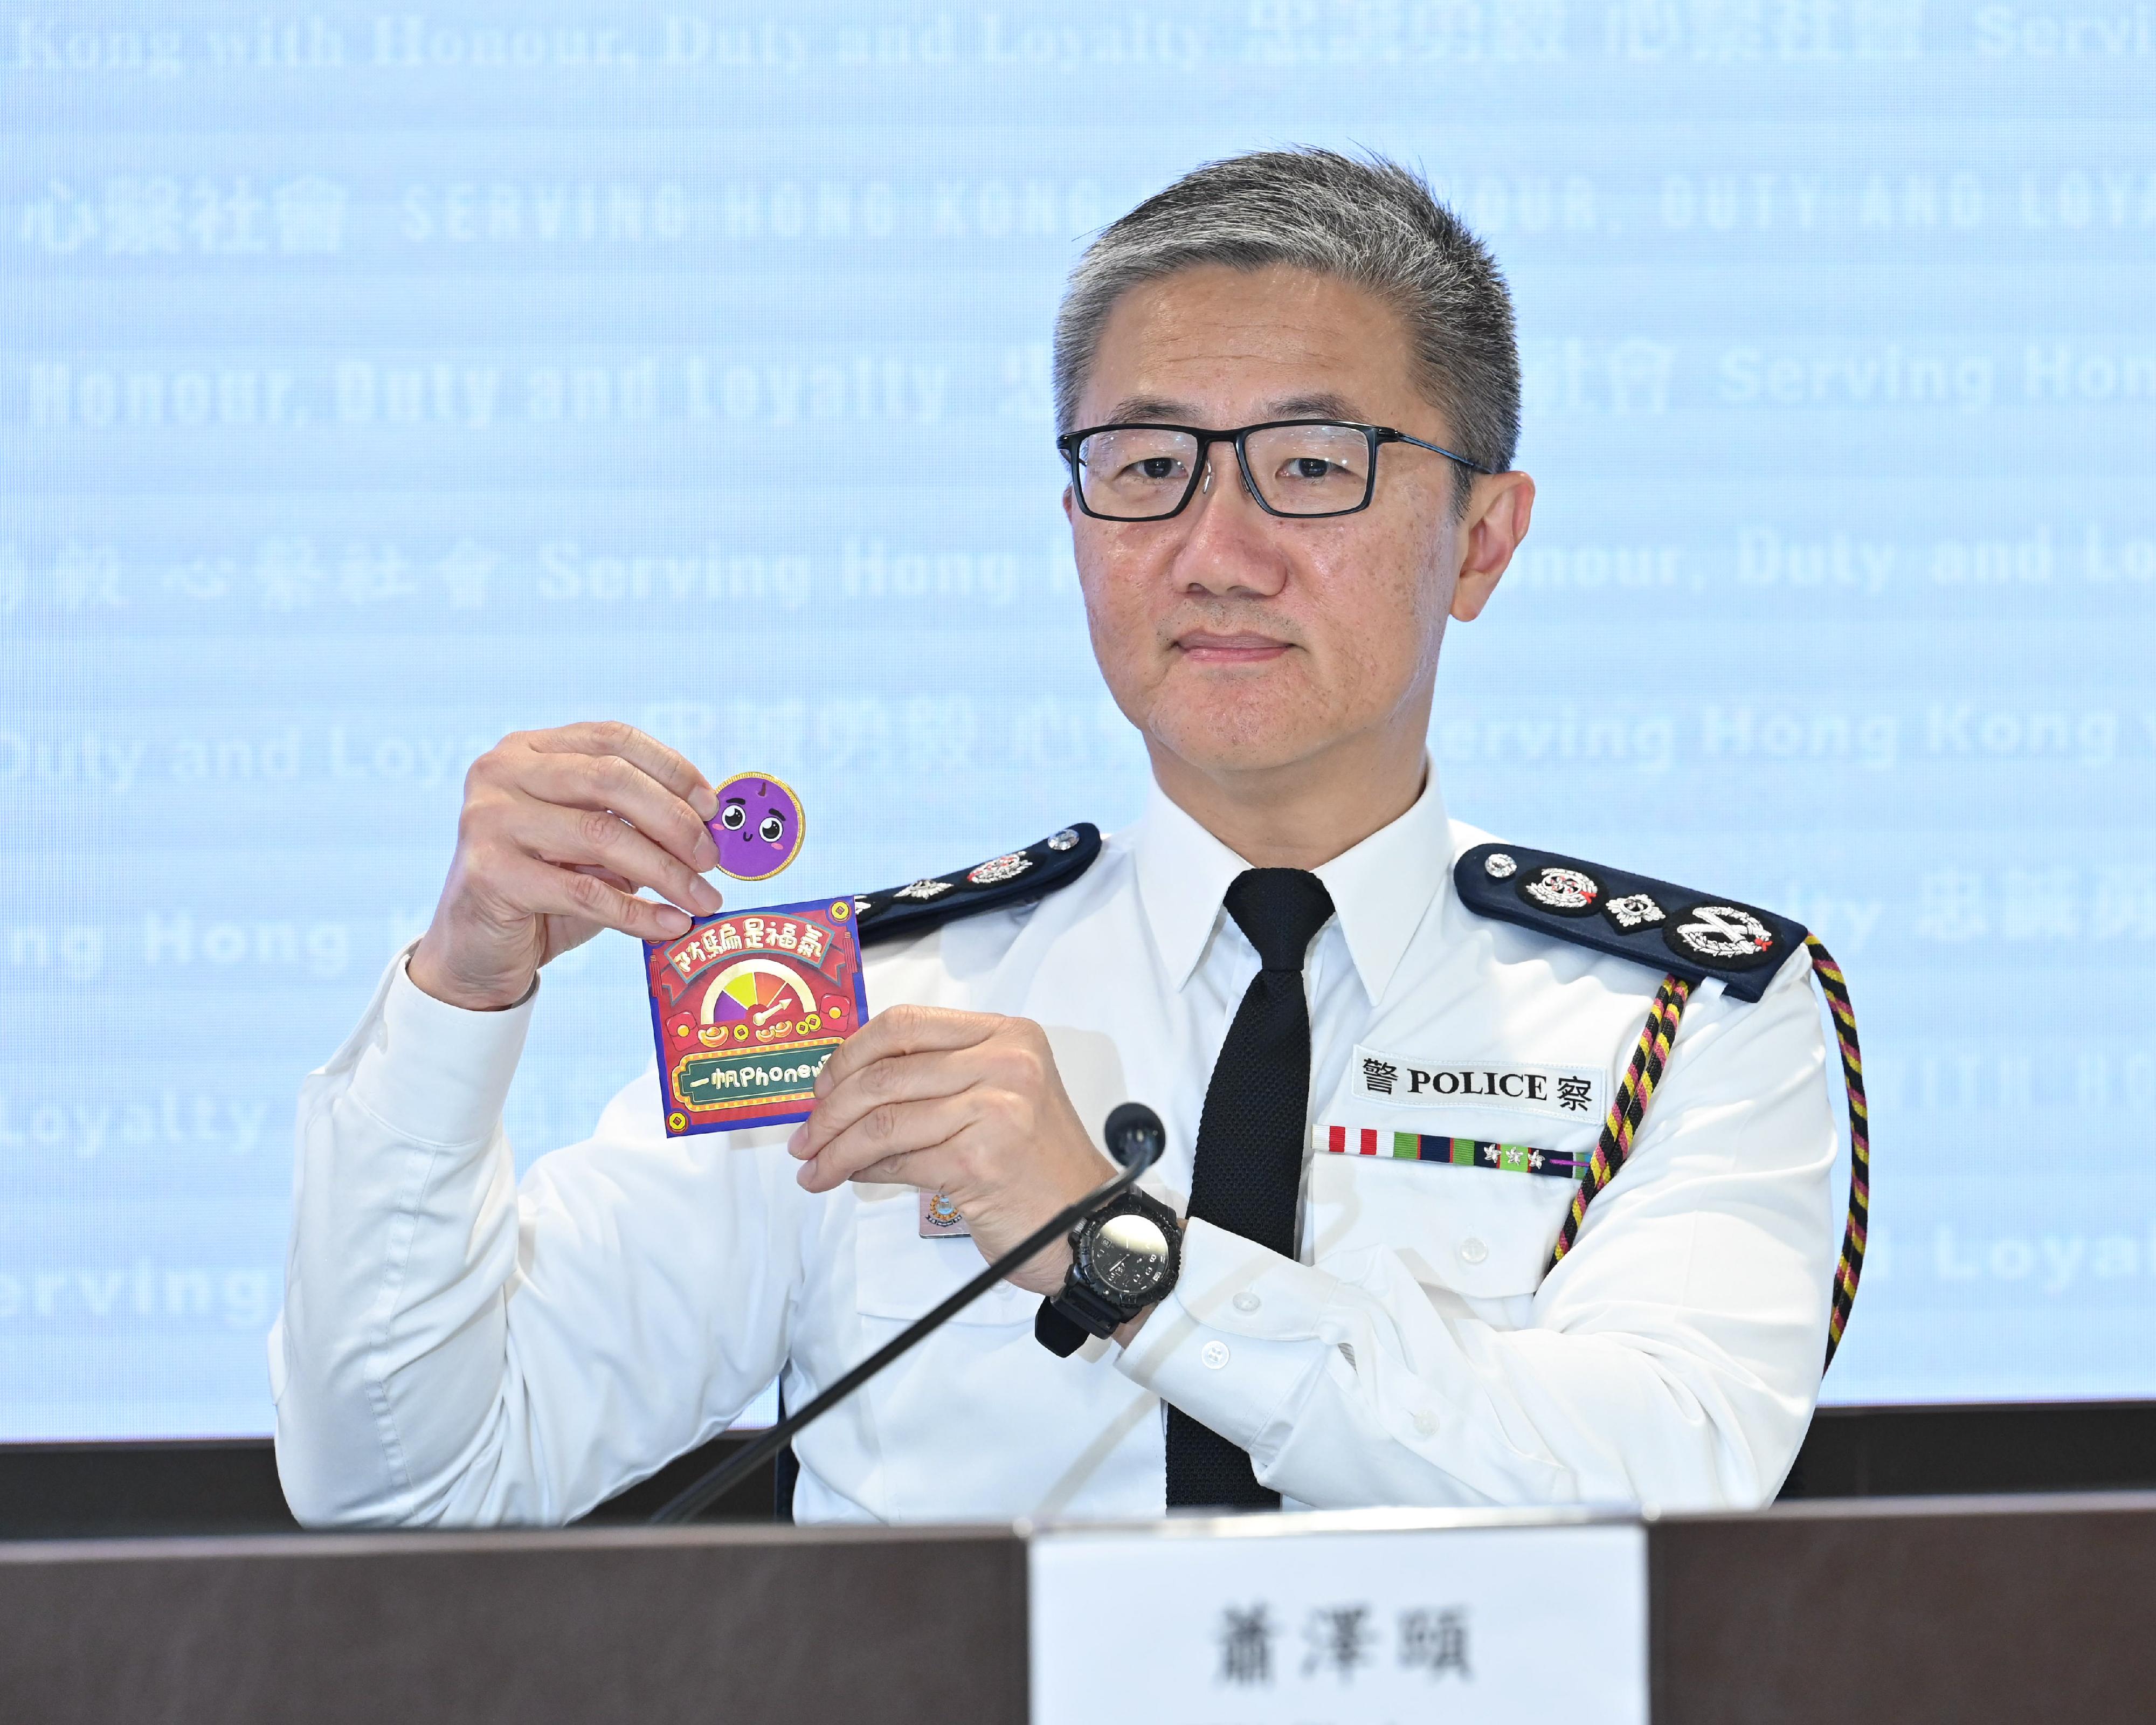 The Commissioner of Police, Mr Siu Chak-yee reviewed the law and order situation of Hong Kong and the work of the Police in 2023 at a press conference today (February 6). Photo shows Mr Siu Chak-yee displaying the anti-deception promotion item “Little Grape Lucky Red Packet” given to the media at the press conference.